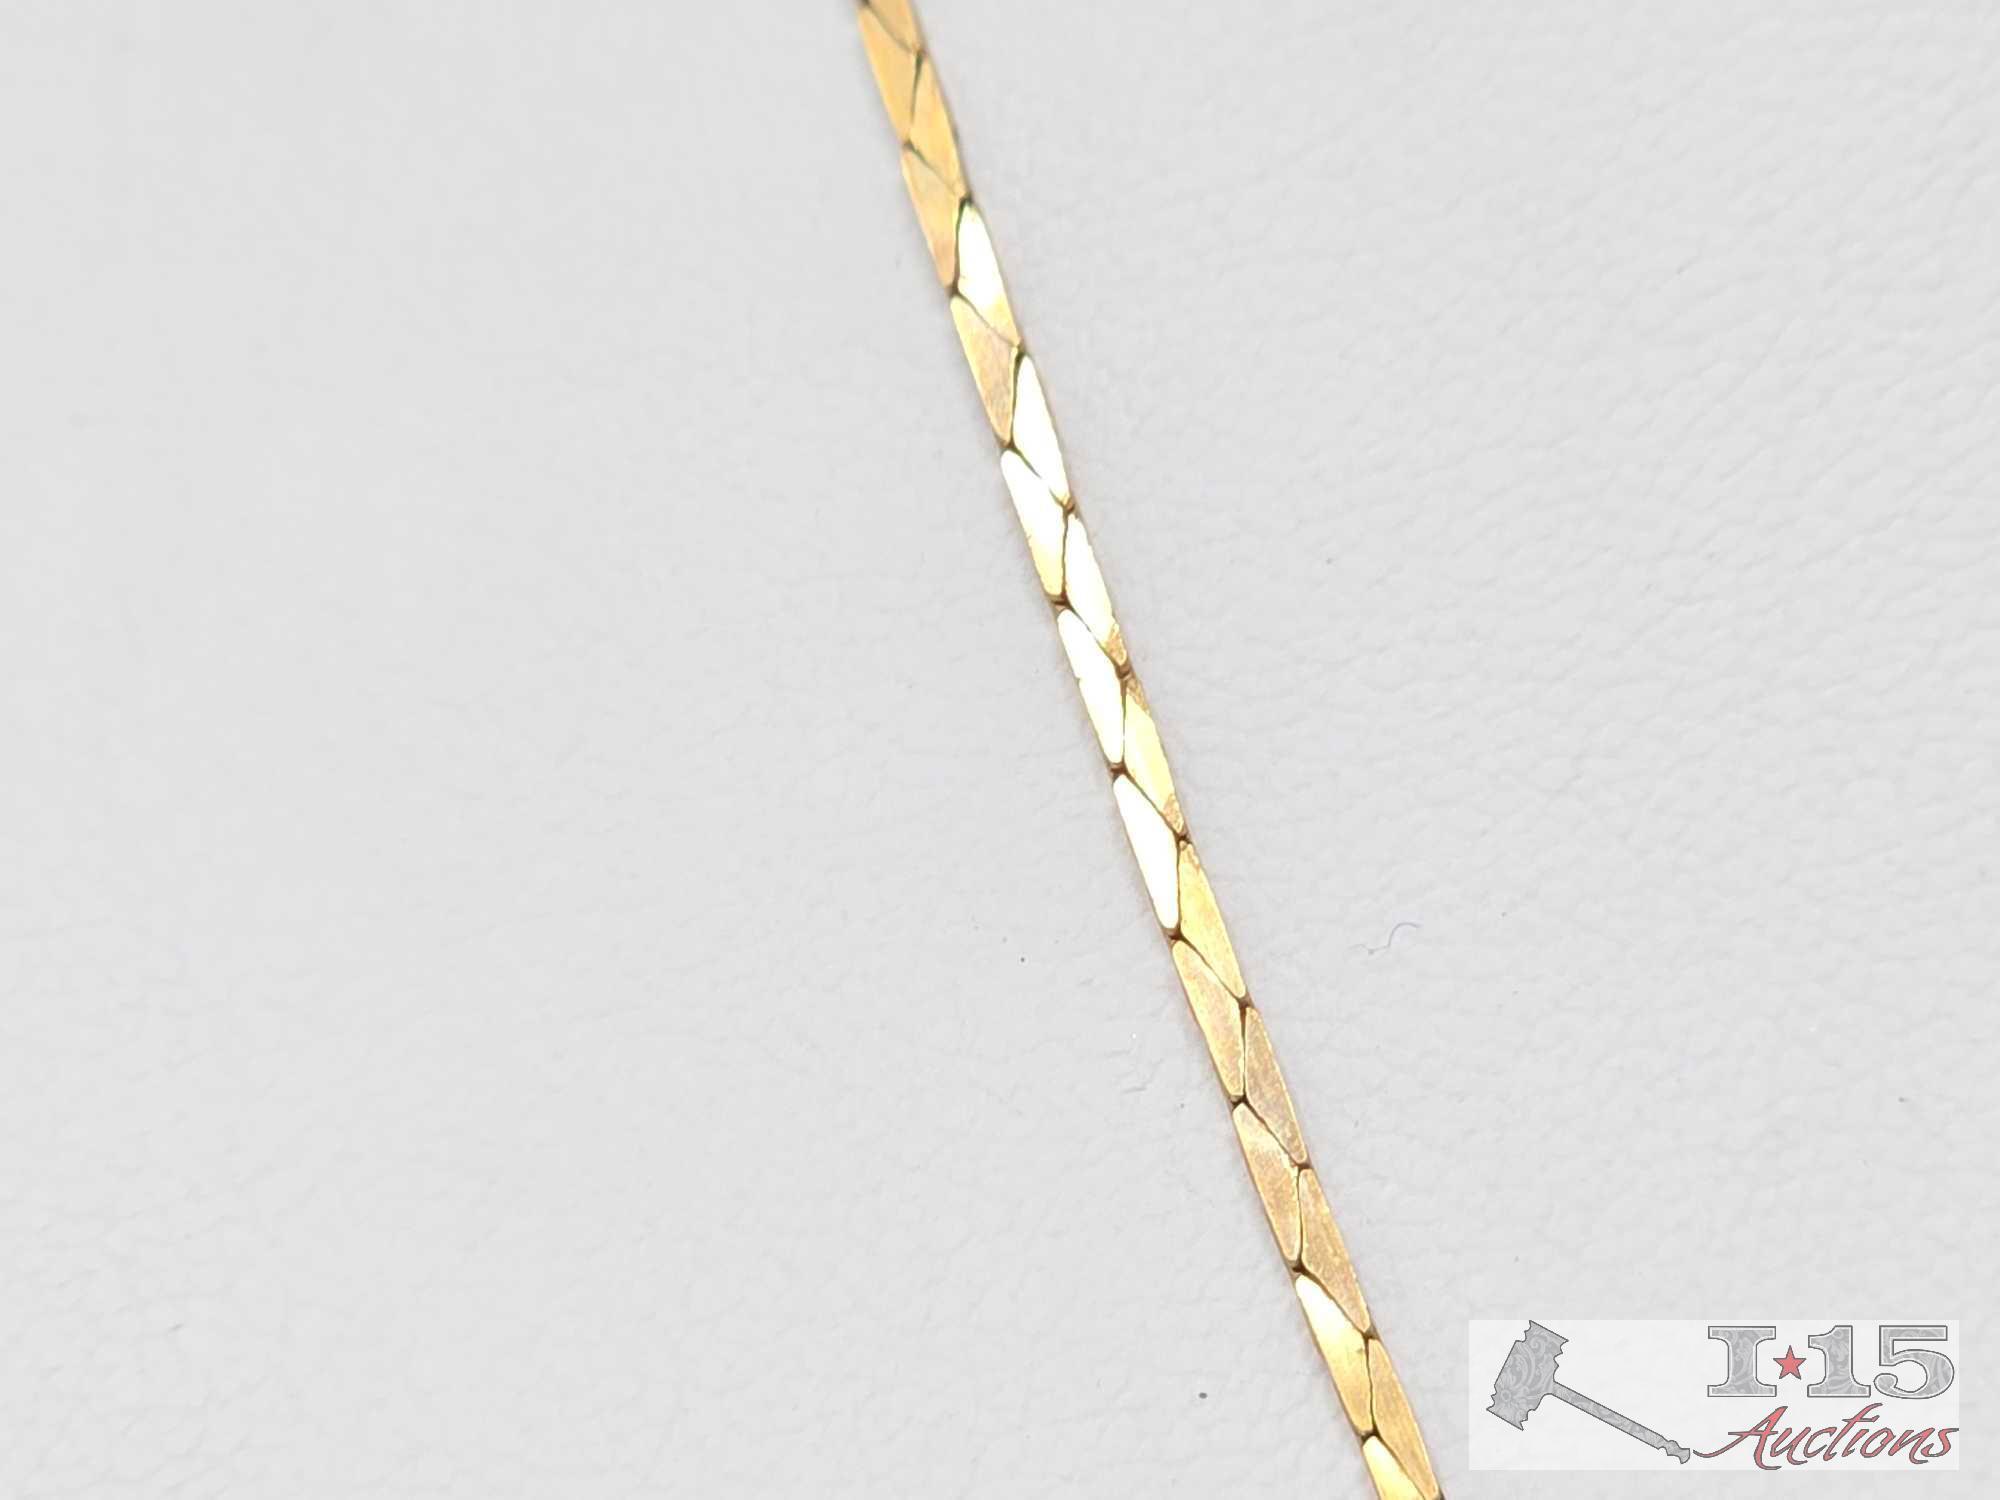 14K Gold Chain Necklace with Pendant, 5.48g